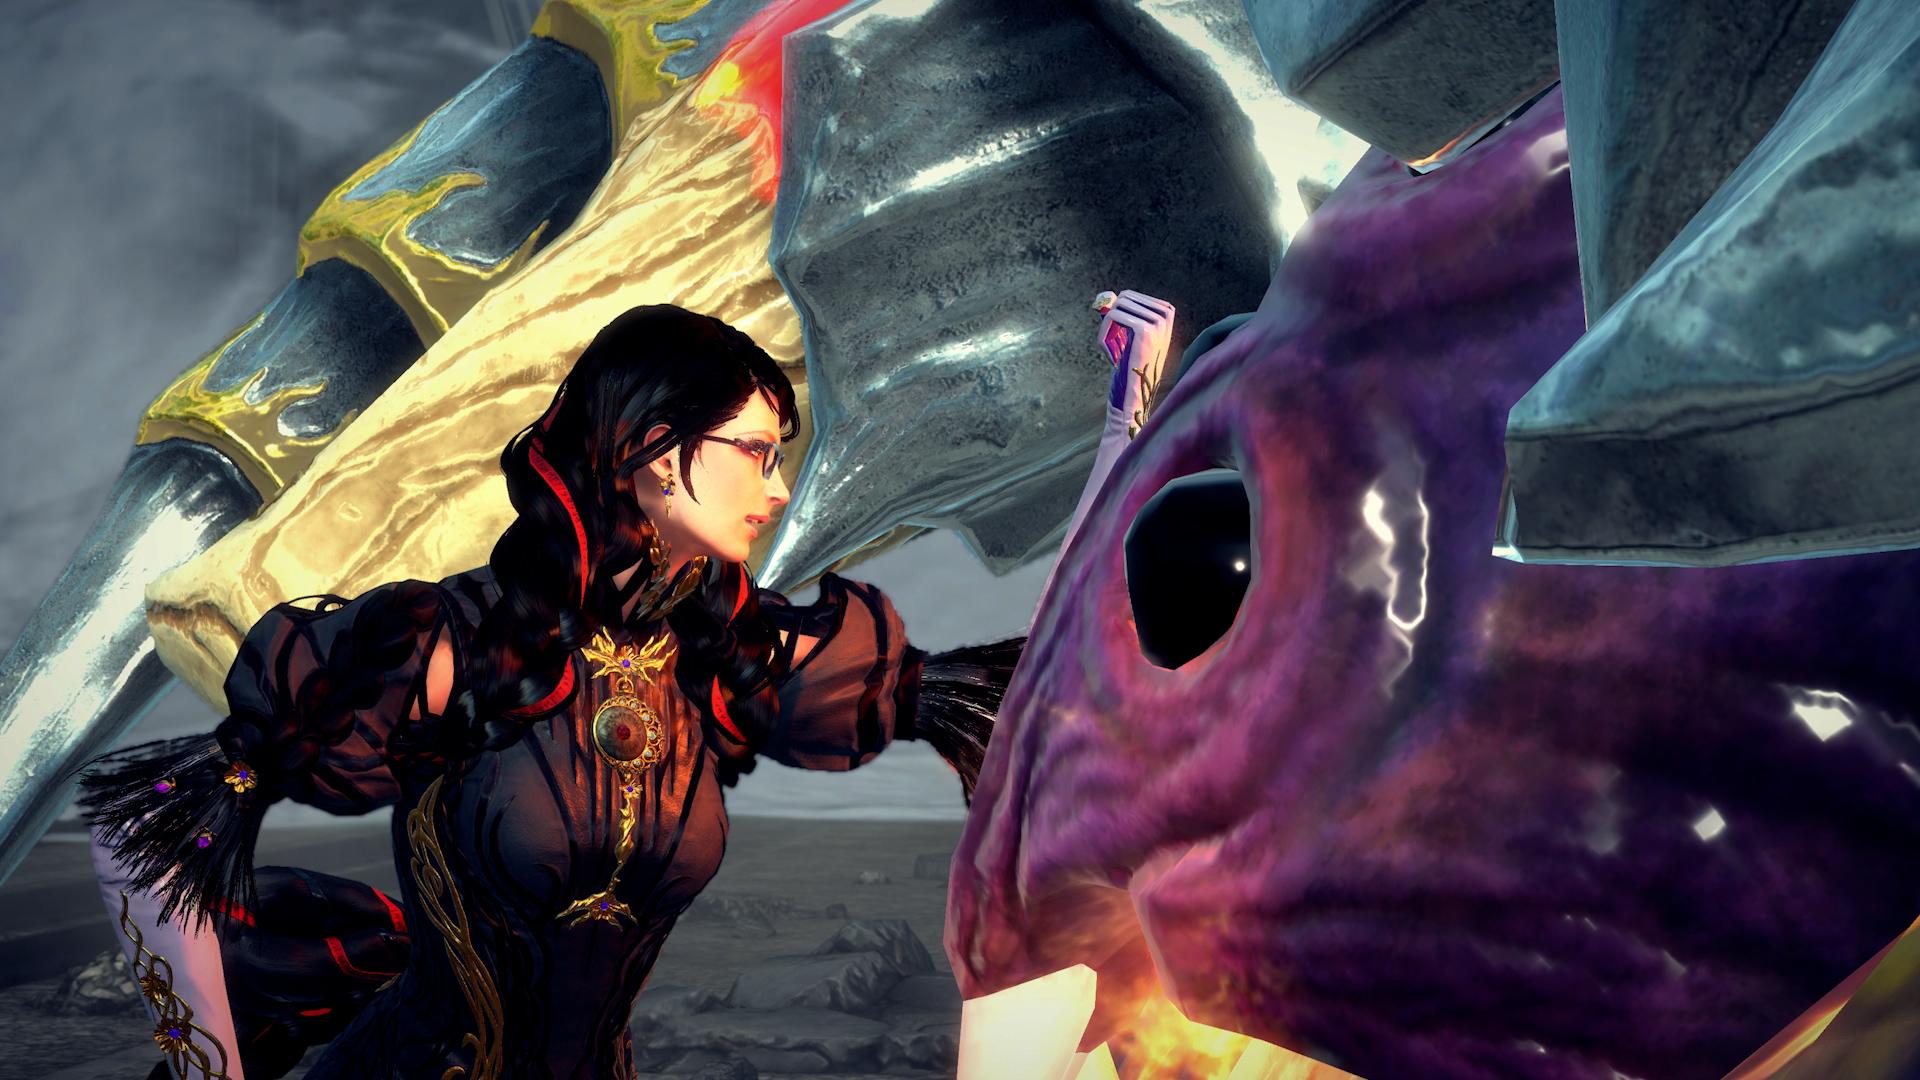 vindue håndled mikro How Long Is 'Bayonetta 3'? Is the Game Worth It?